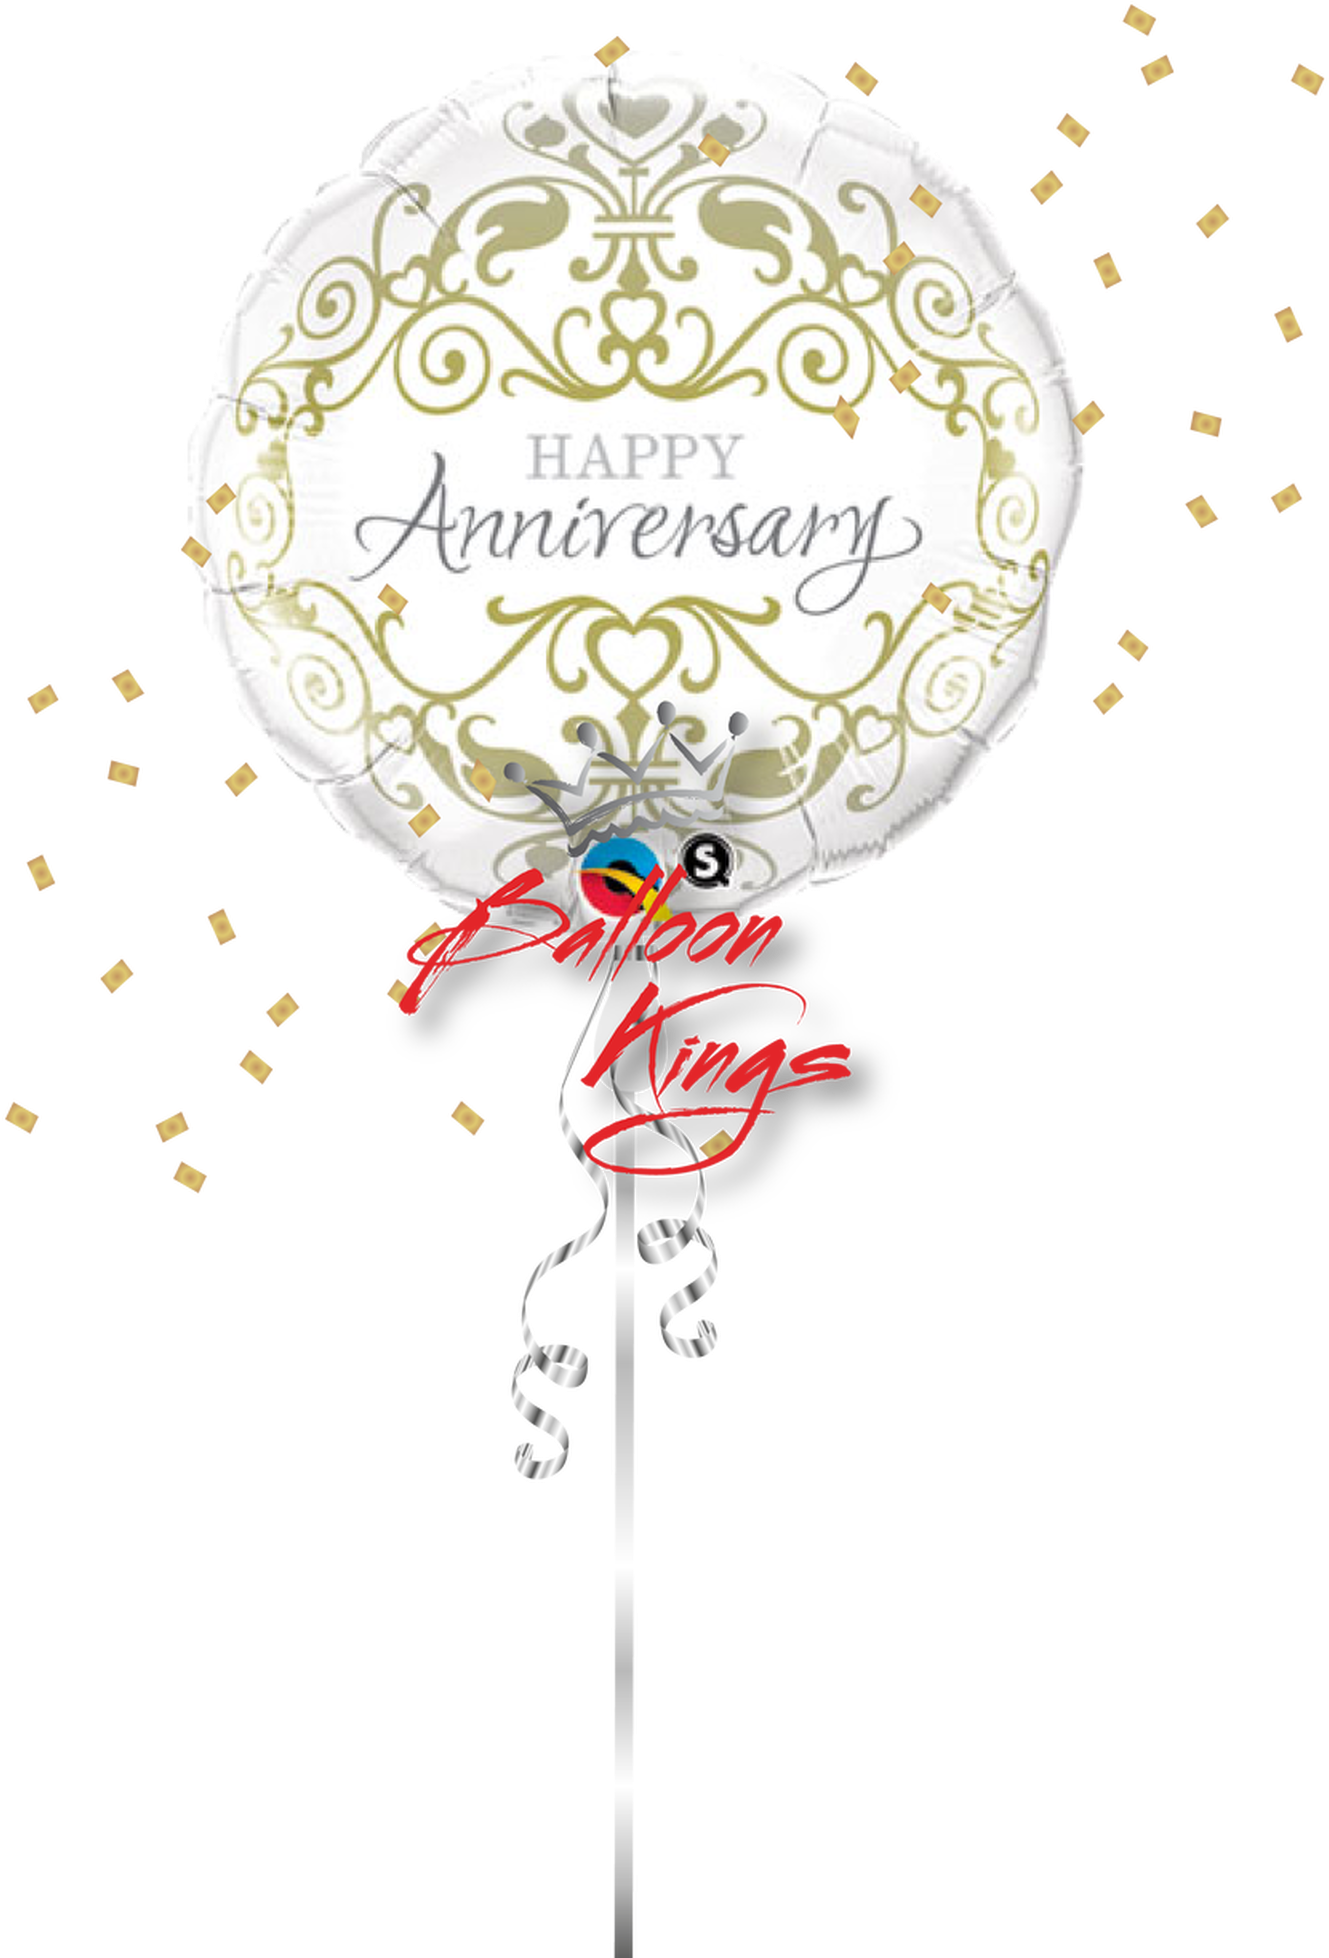 A White And Gold Balloon With A Ribbon And Confetti